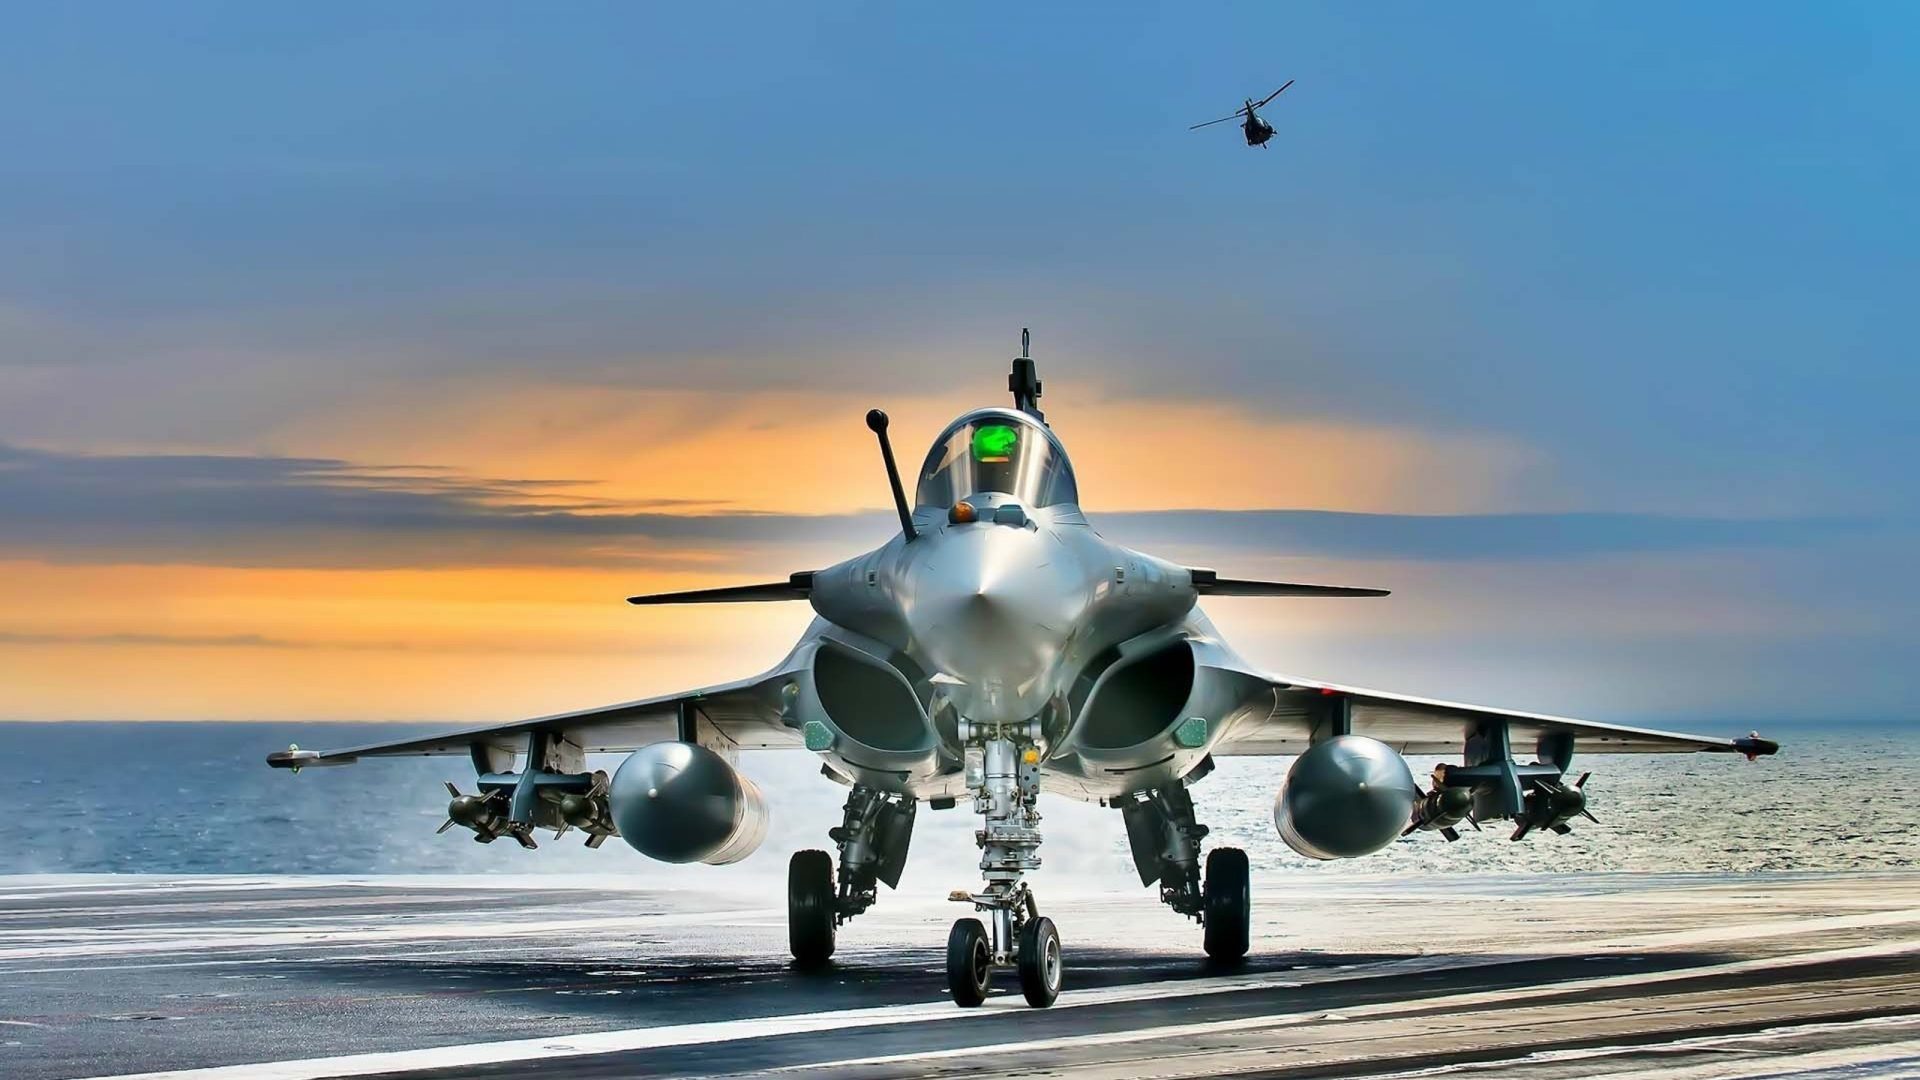 Fighter Jet Rafale Military Aircraft The New Beast Of India For Your XFCE Desktop